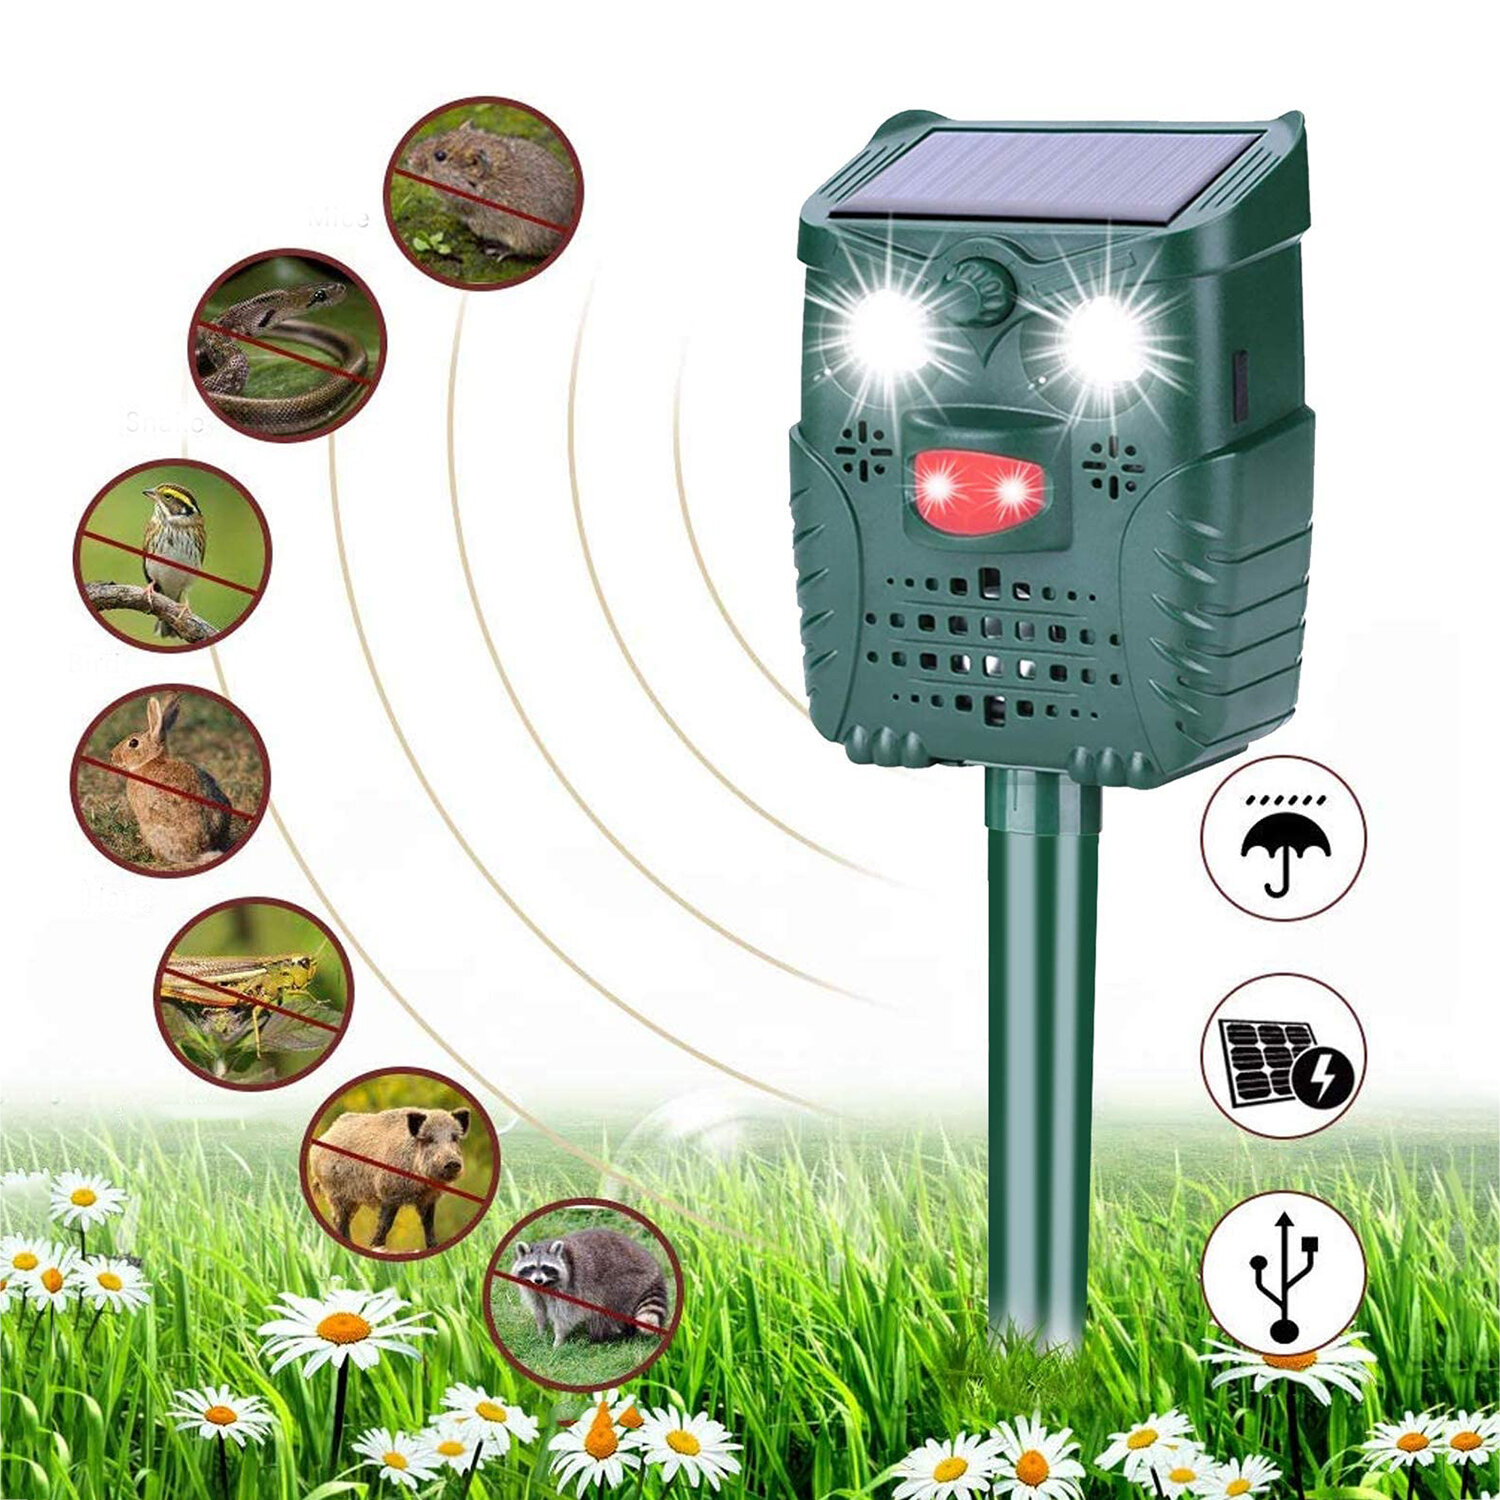 

-WH528 Outdoor Solar Ultrasonic Animal Repeller Pest Control Bats Birds Dogs Cats Repeller with Flashing Light